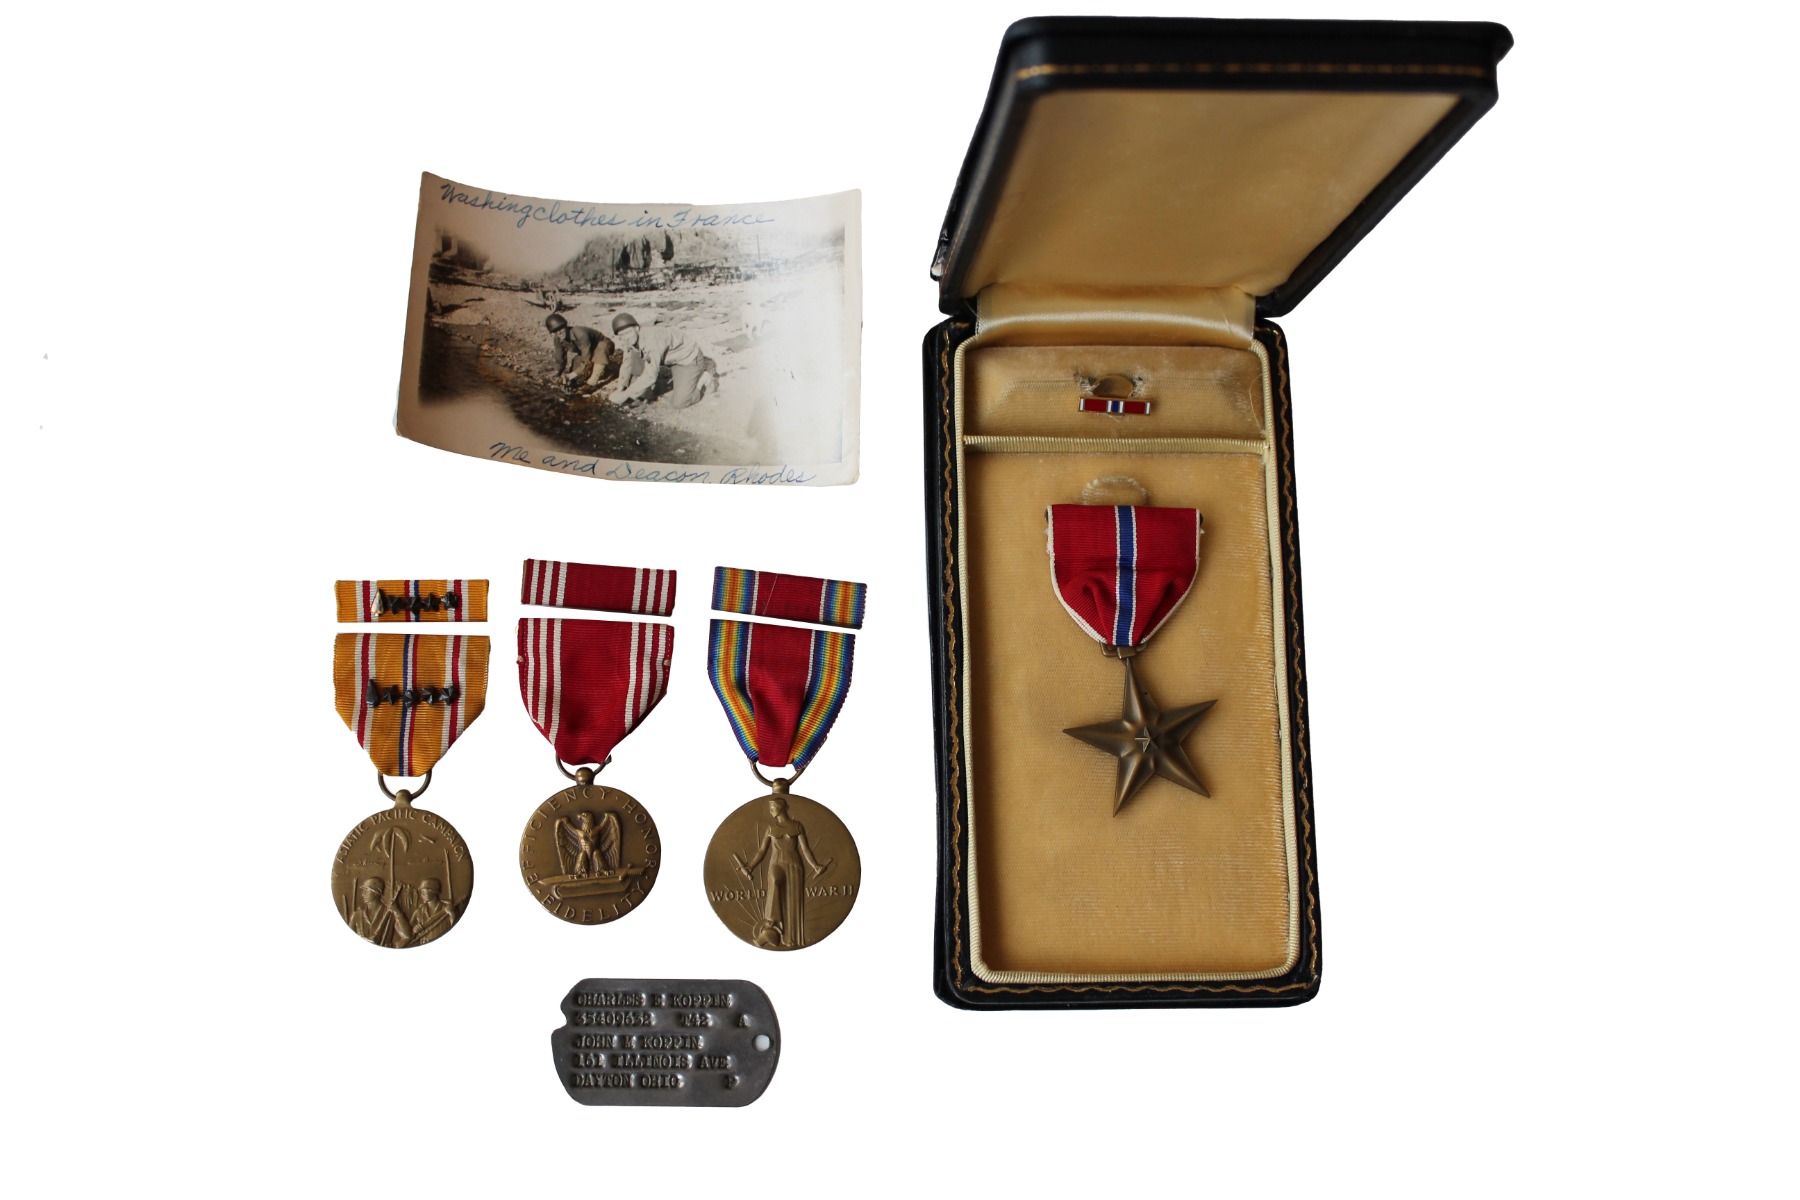 MEDAL GROUPING FROM U.S. SOLDIER CHARLES KOPPIN